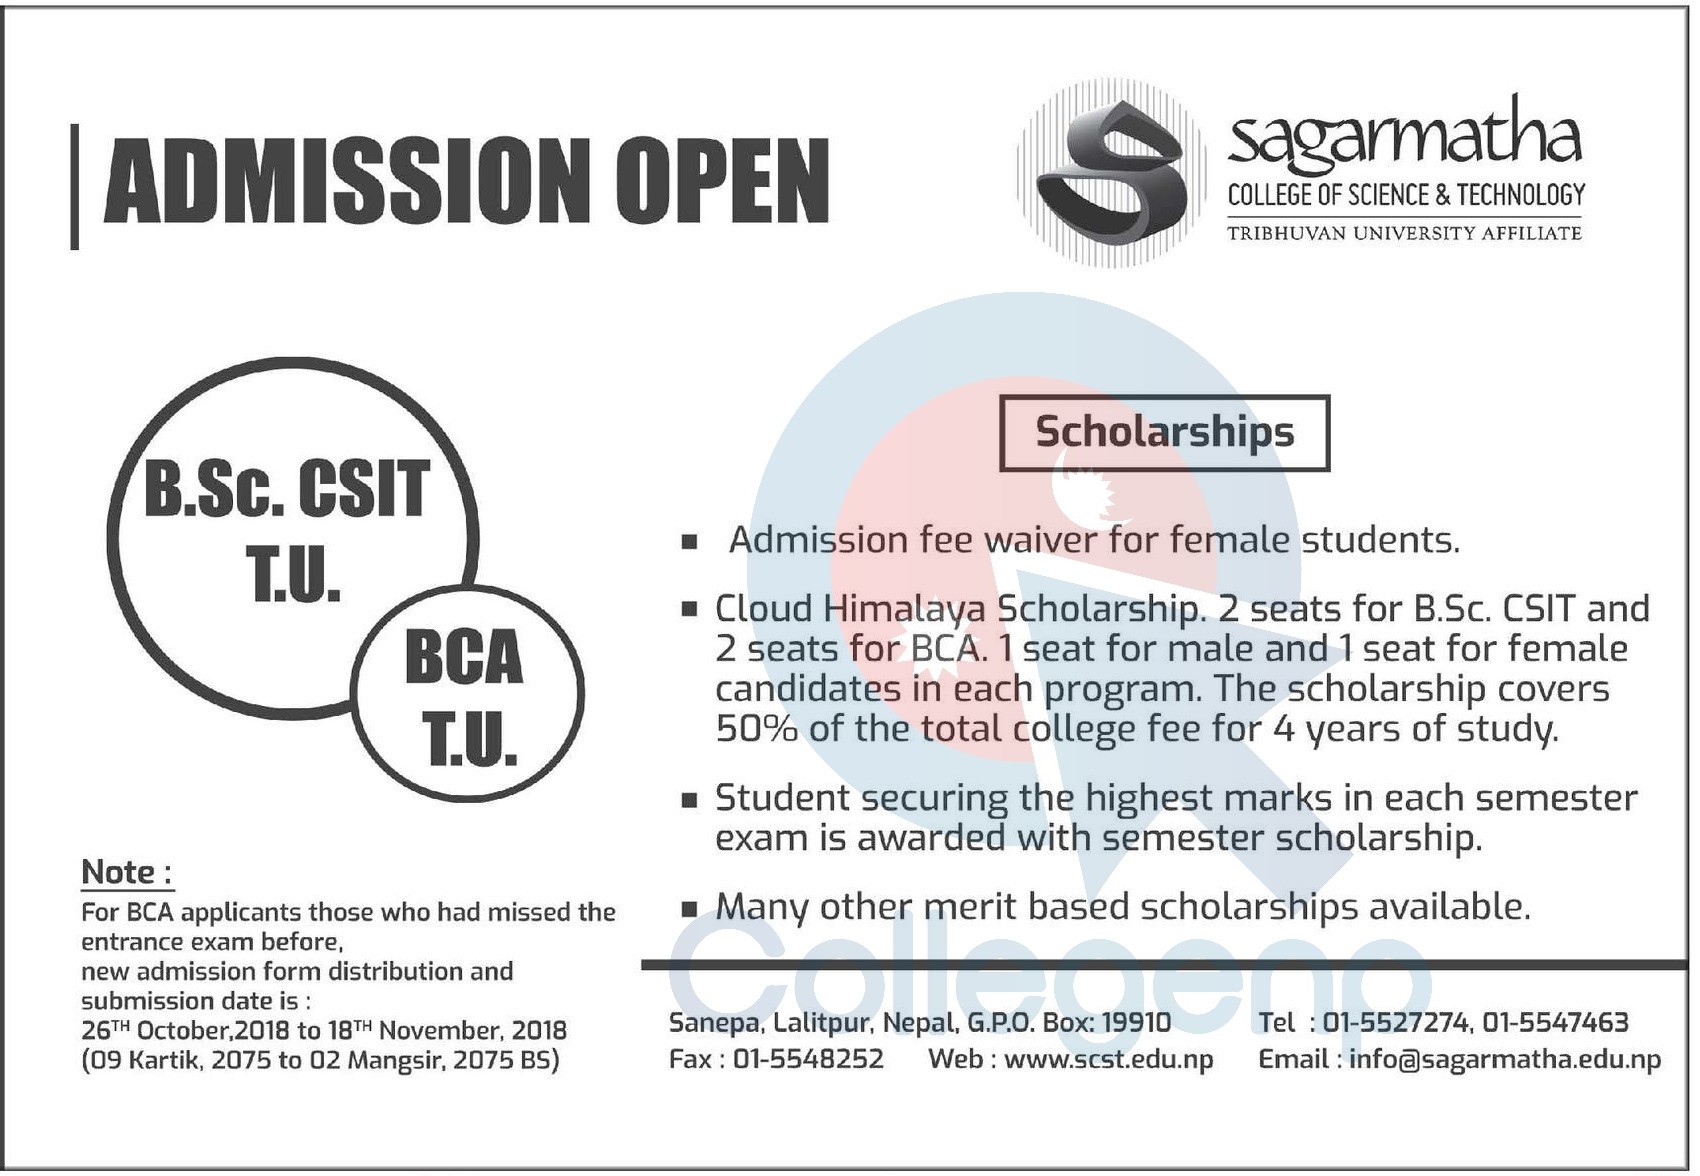 Sagarmatha College of Science and Technology Scholarships Schemes